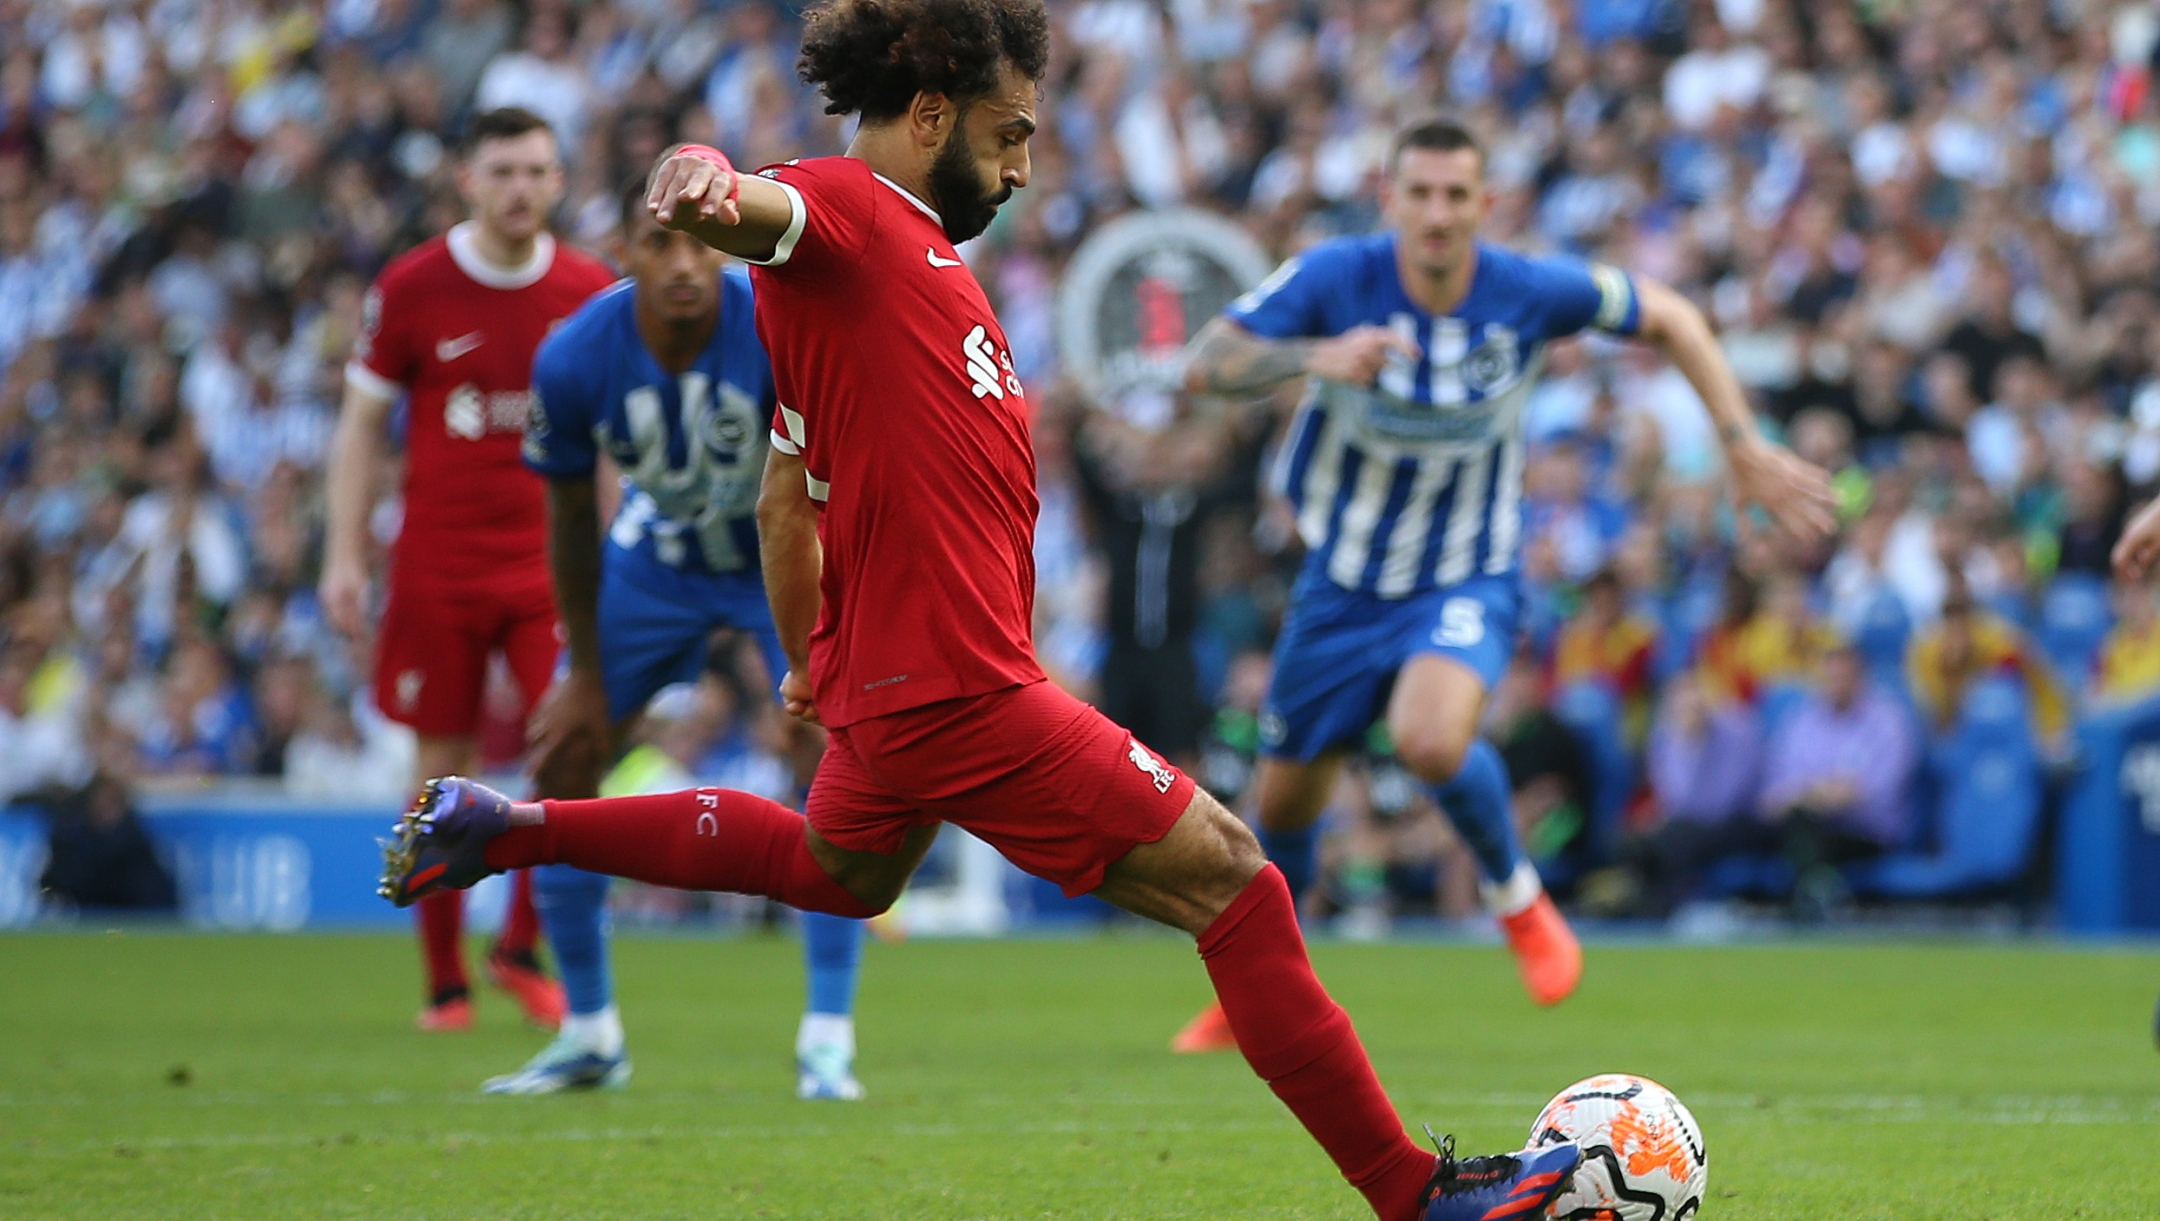 BRIGHTON, ENGLAND - OCTOBER 08: Mohamed Salah of Liverpool scores the team's second goal from a penalty during the Premier League match between Brighton & Hove Albion and Liverpool FC at American Express Community Stadium on October 08, 2023 in Brighton, England. (Photo by Steve Bardens/Getty Images)